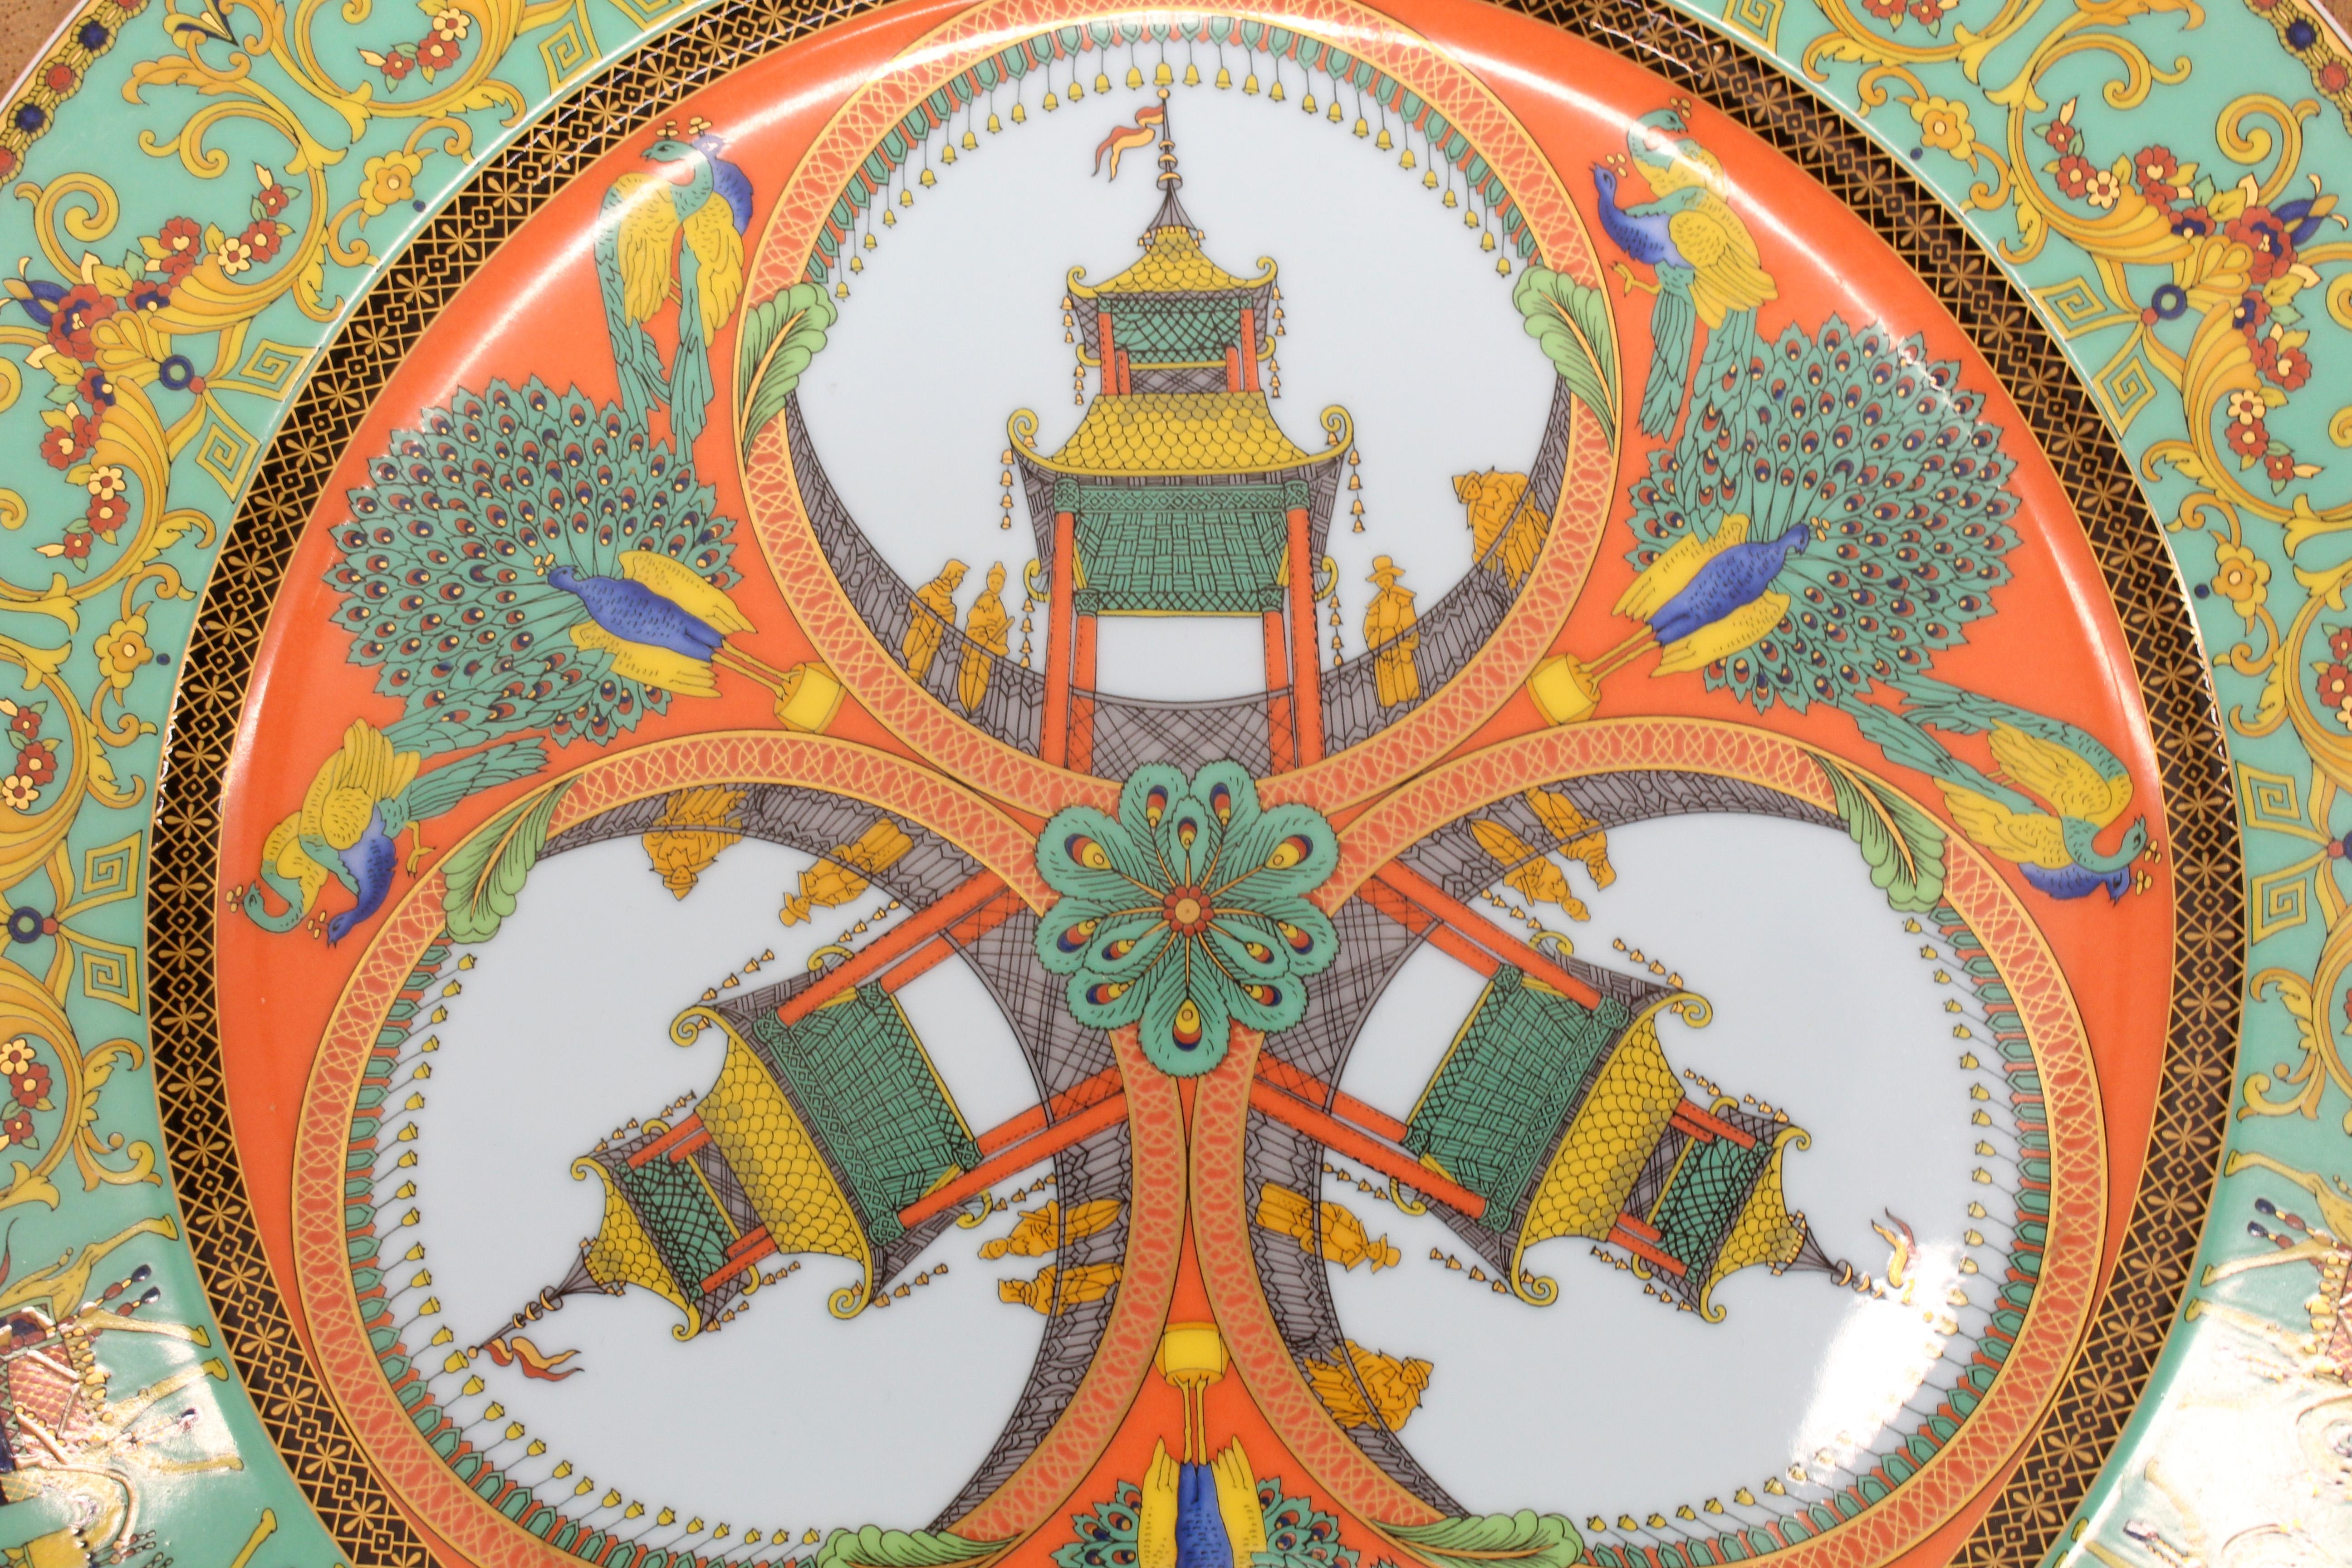 Rosenthal Versace Porcelain Charger Plate In Excellent Condition For Sale In Rockaway, NJ